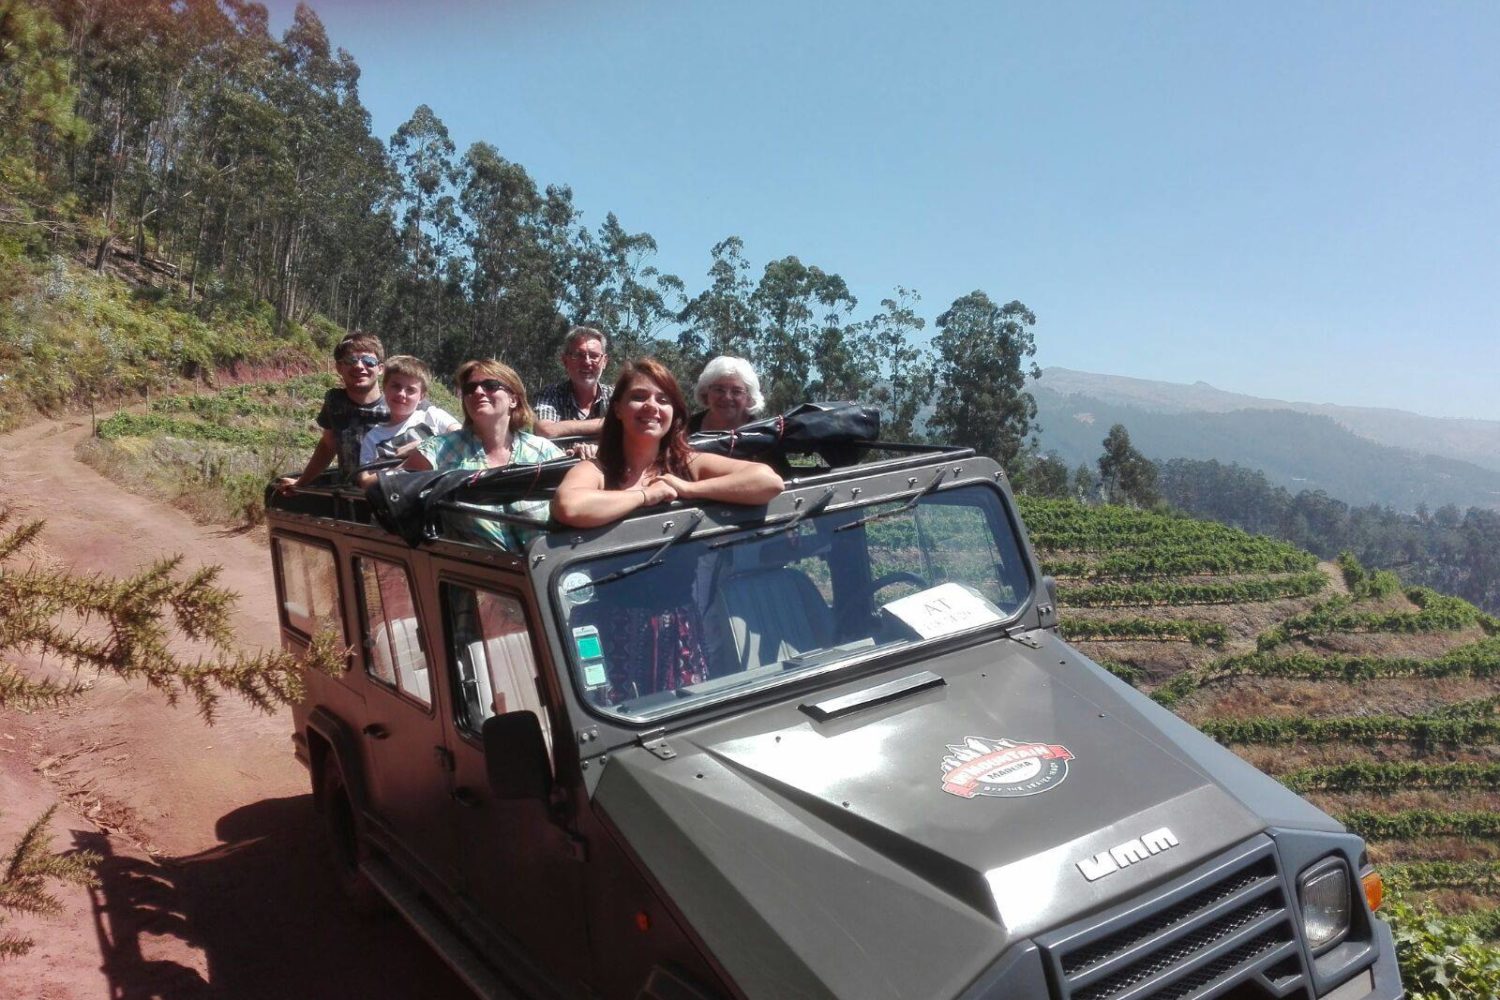 Another great day in our Jeep tours